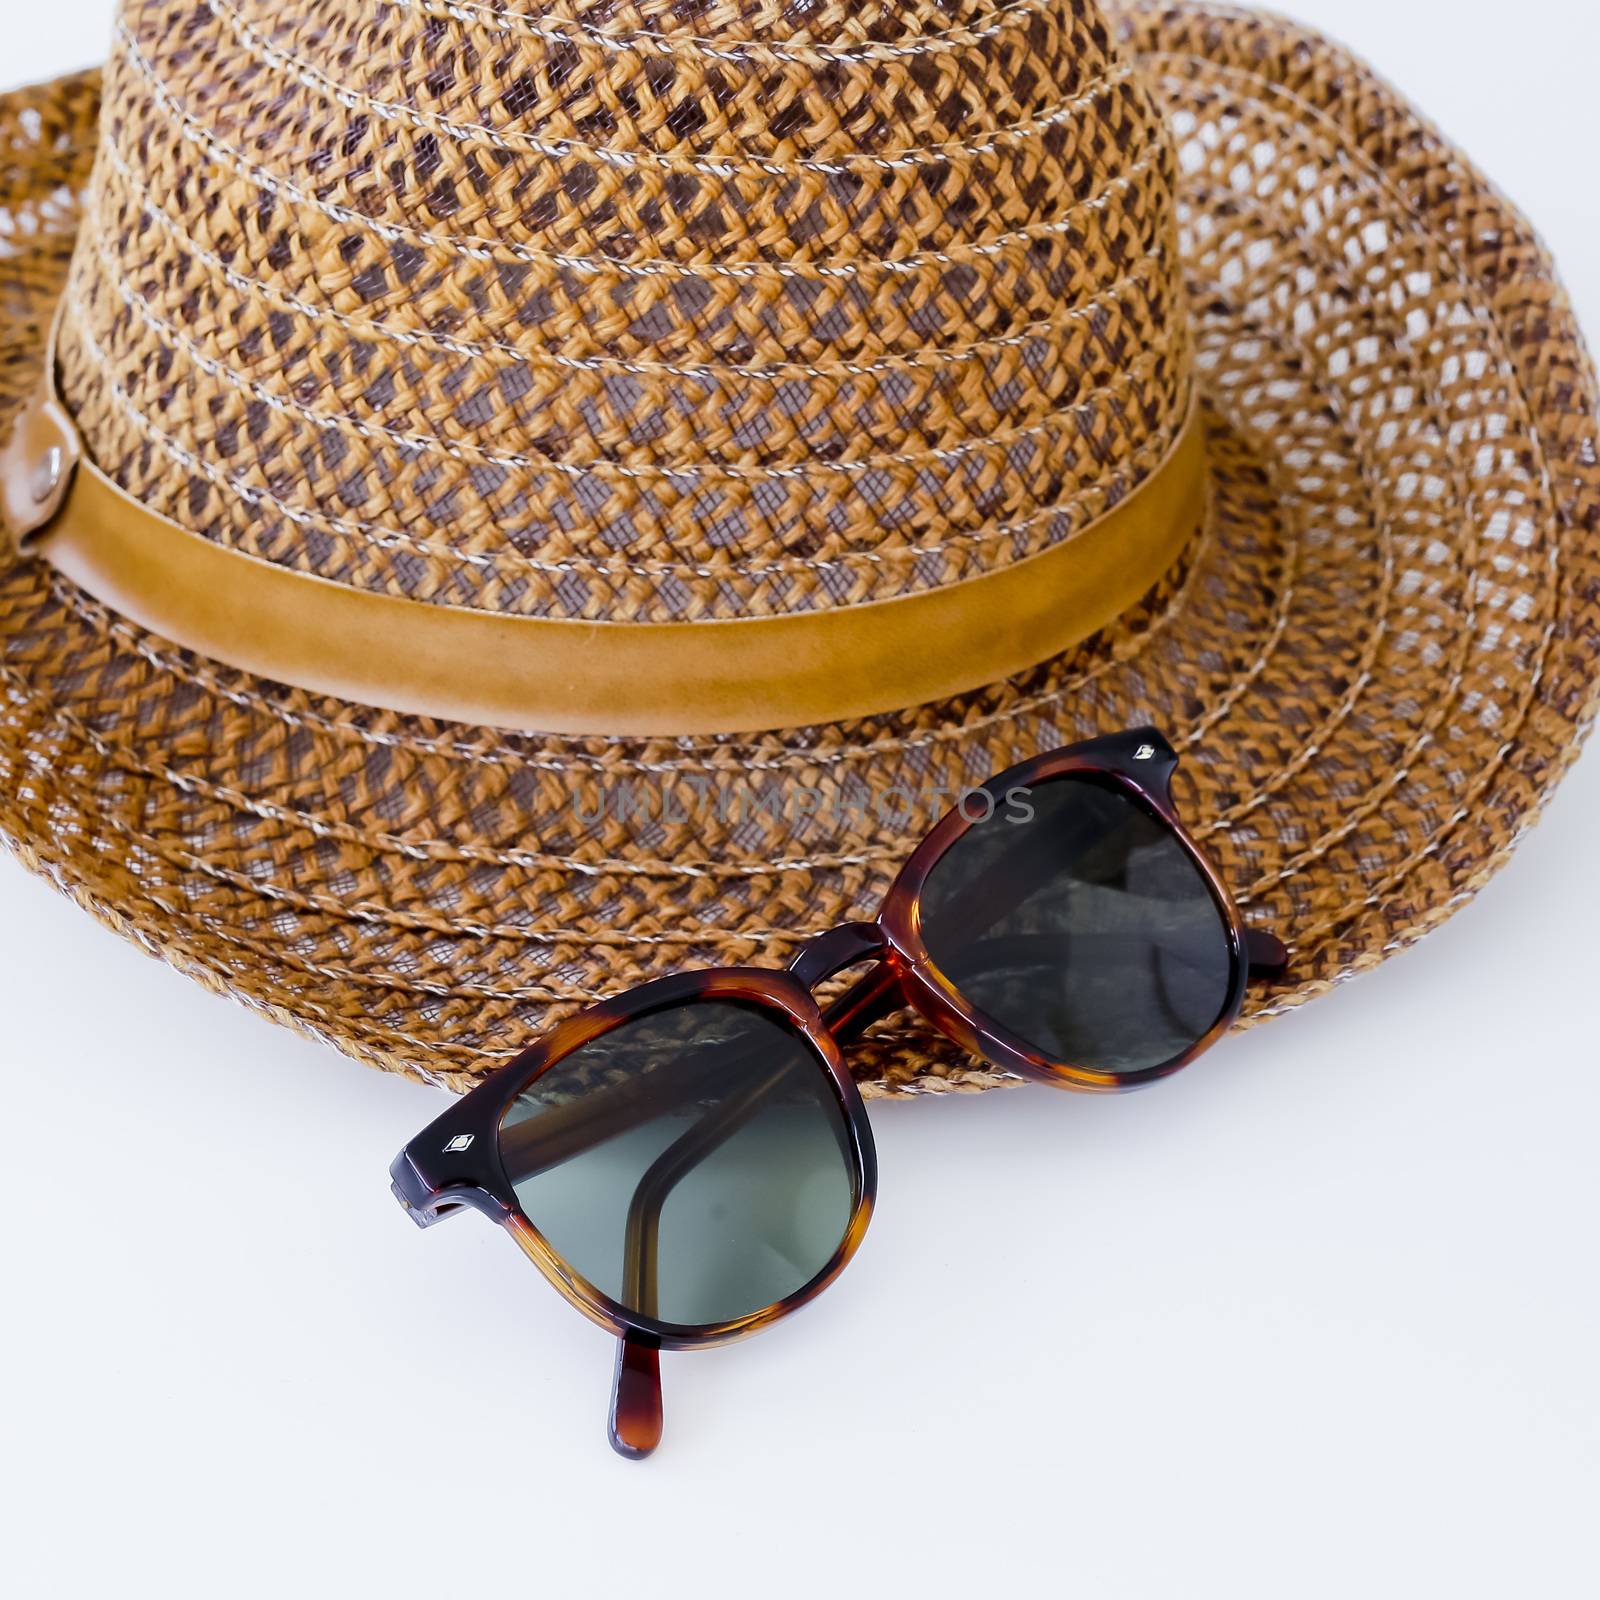 sunprotection objects sunglasses and hat by art9858